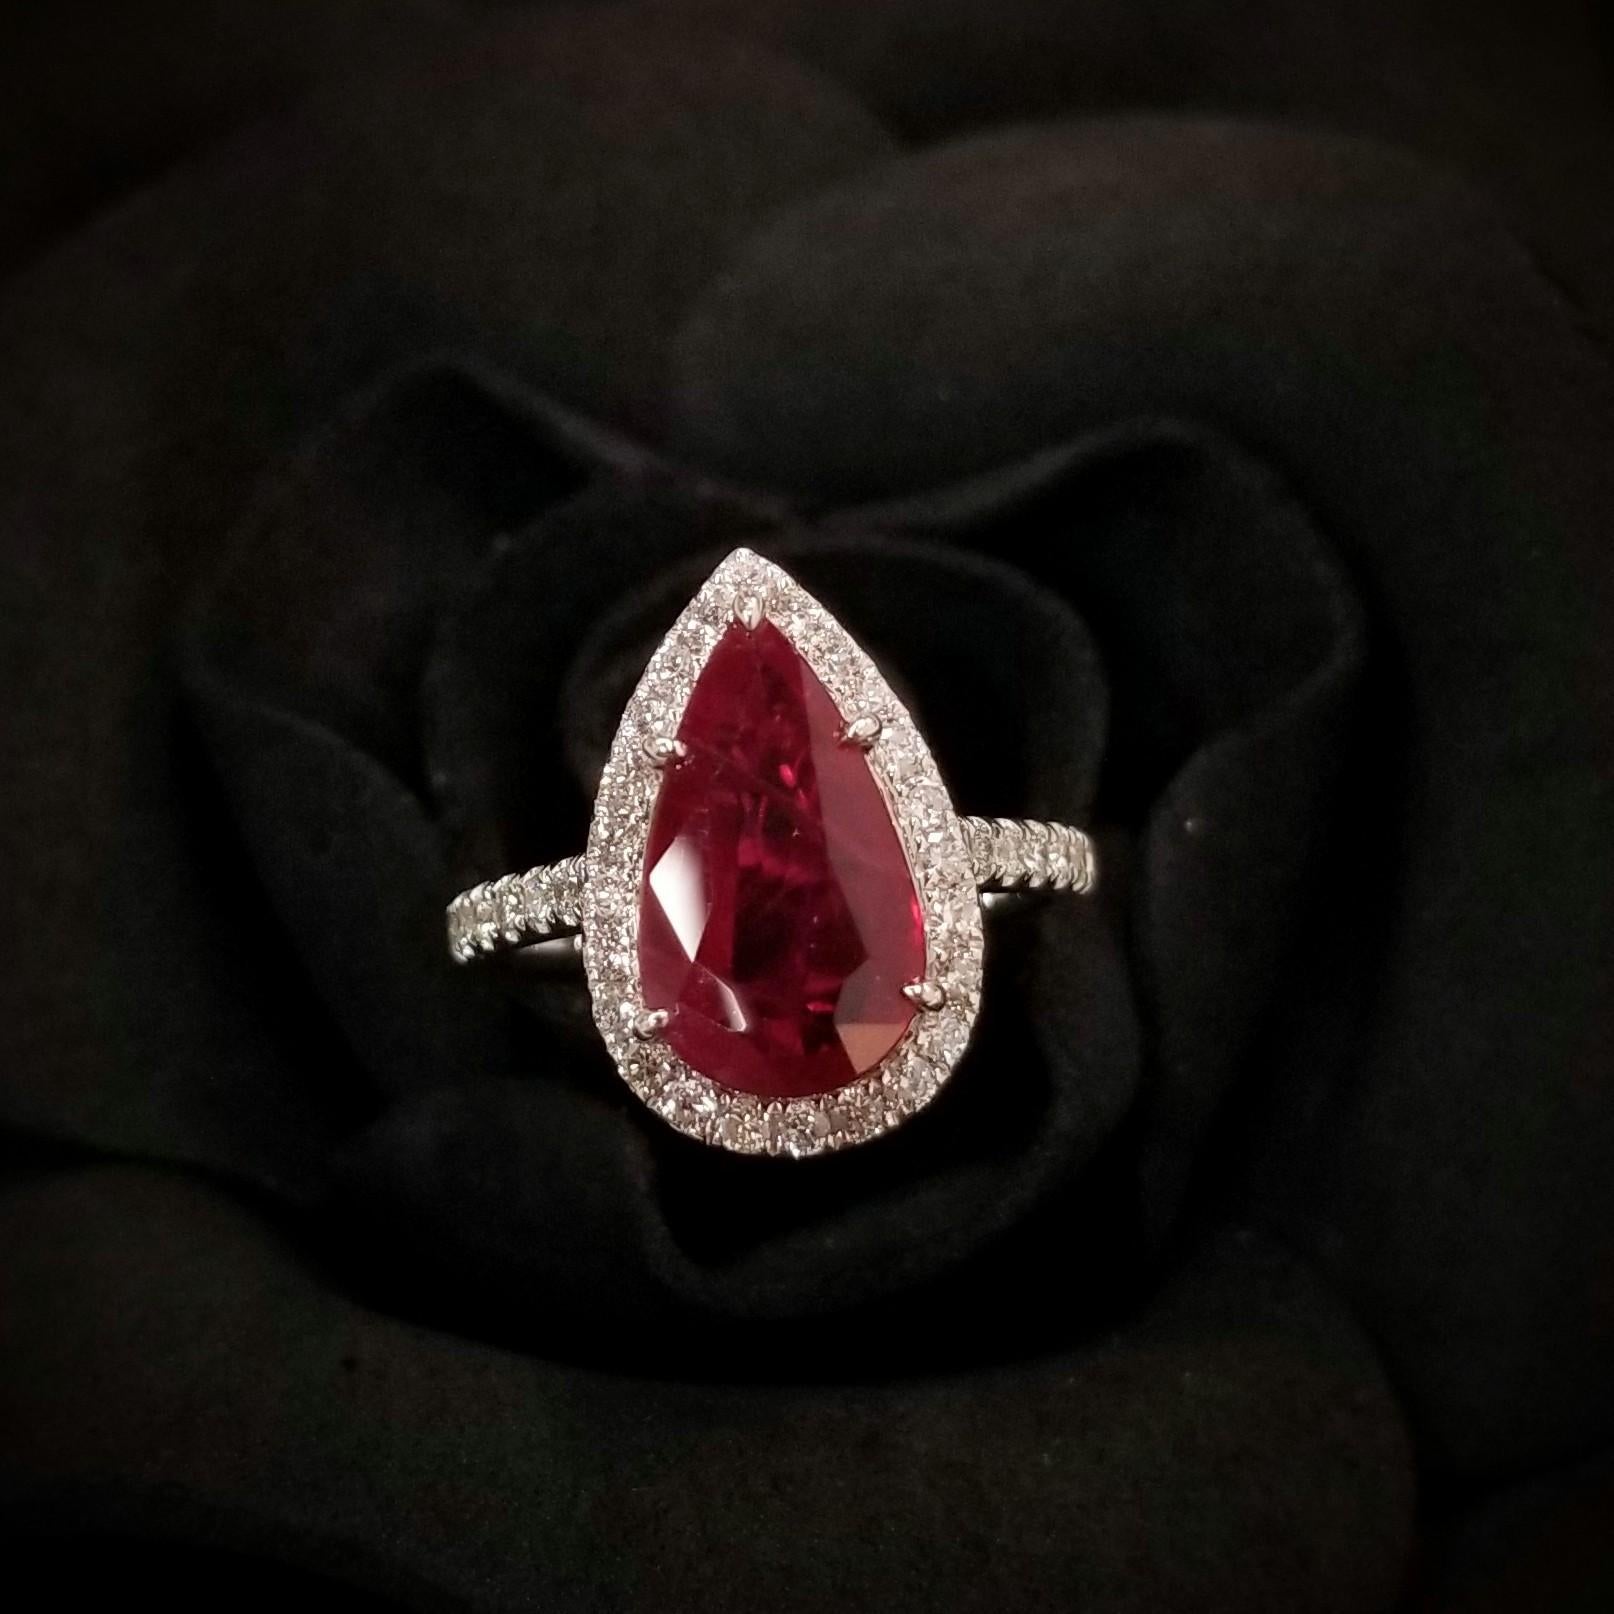 Modern AIG Certified 3.03 Carat Ruby & Diamond Ring in 18K White Gold For Sale